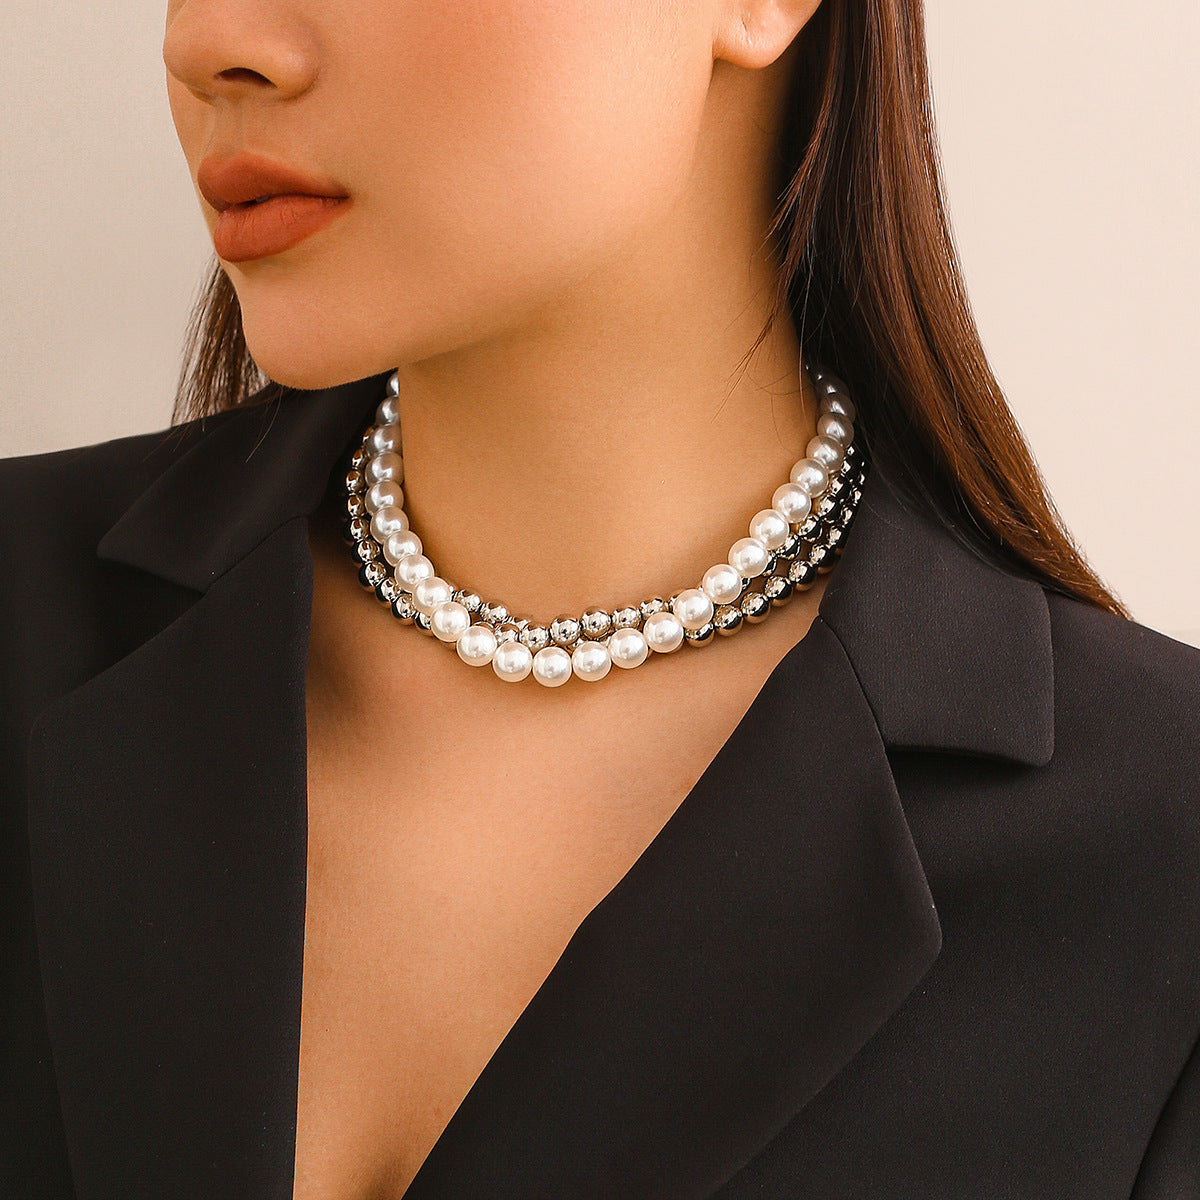 Contrasting Beaded Choker Necklace with European and American Influence